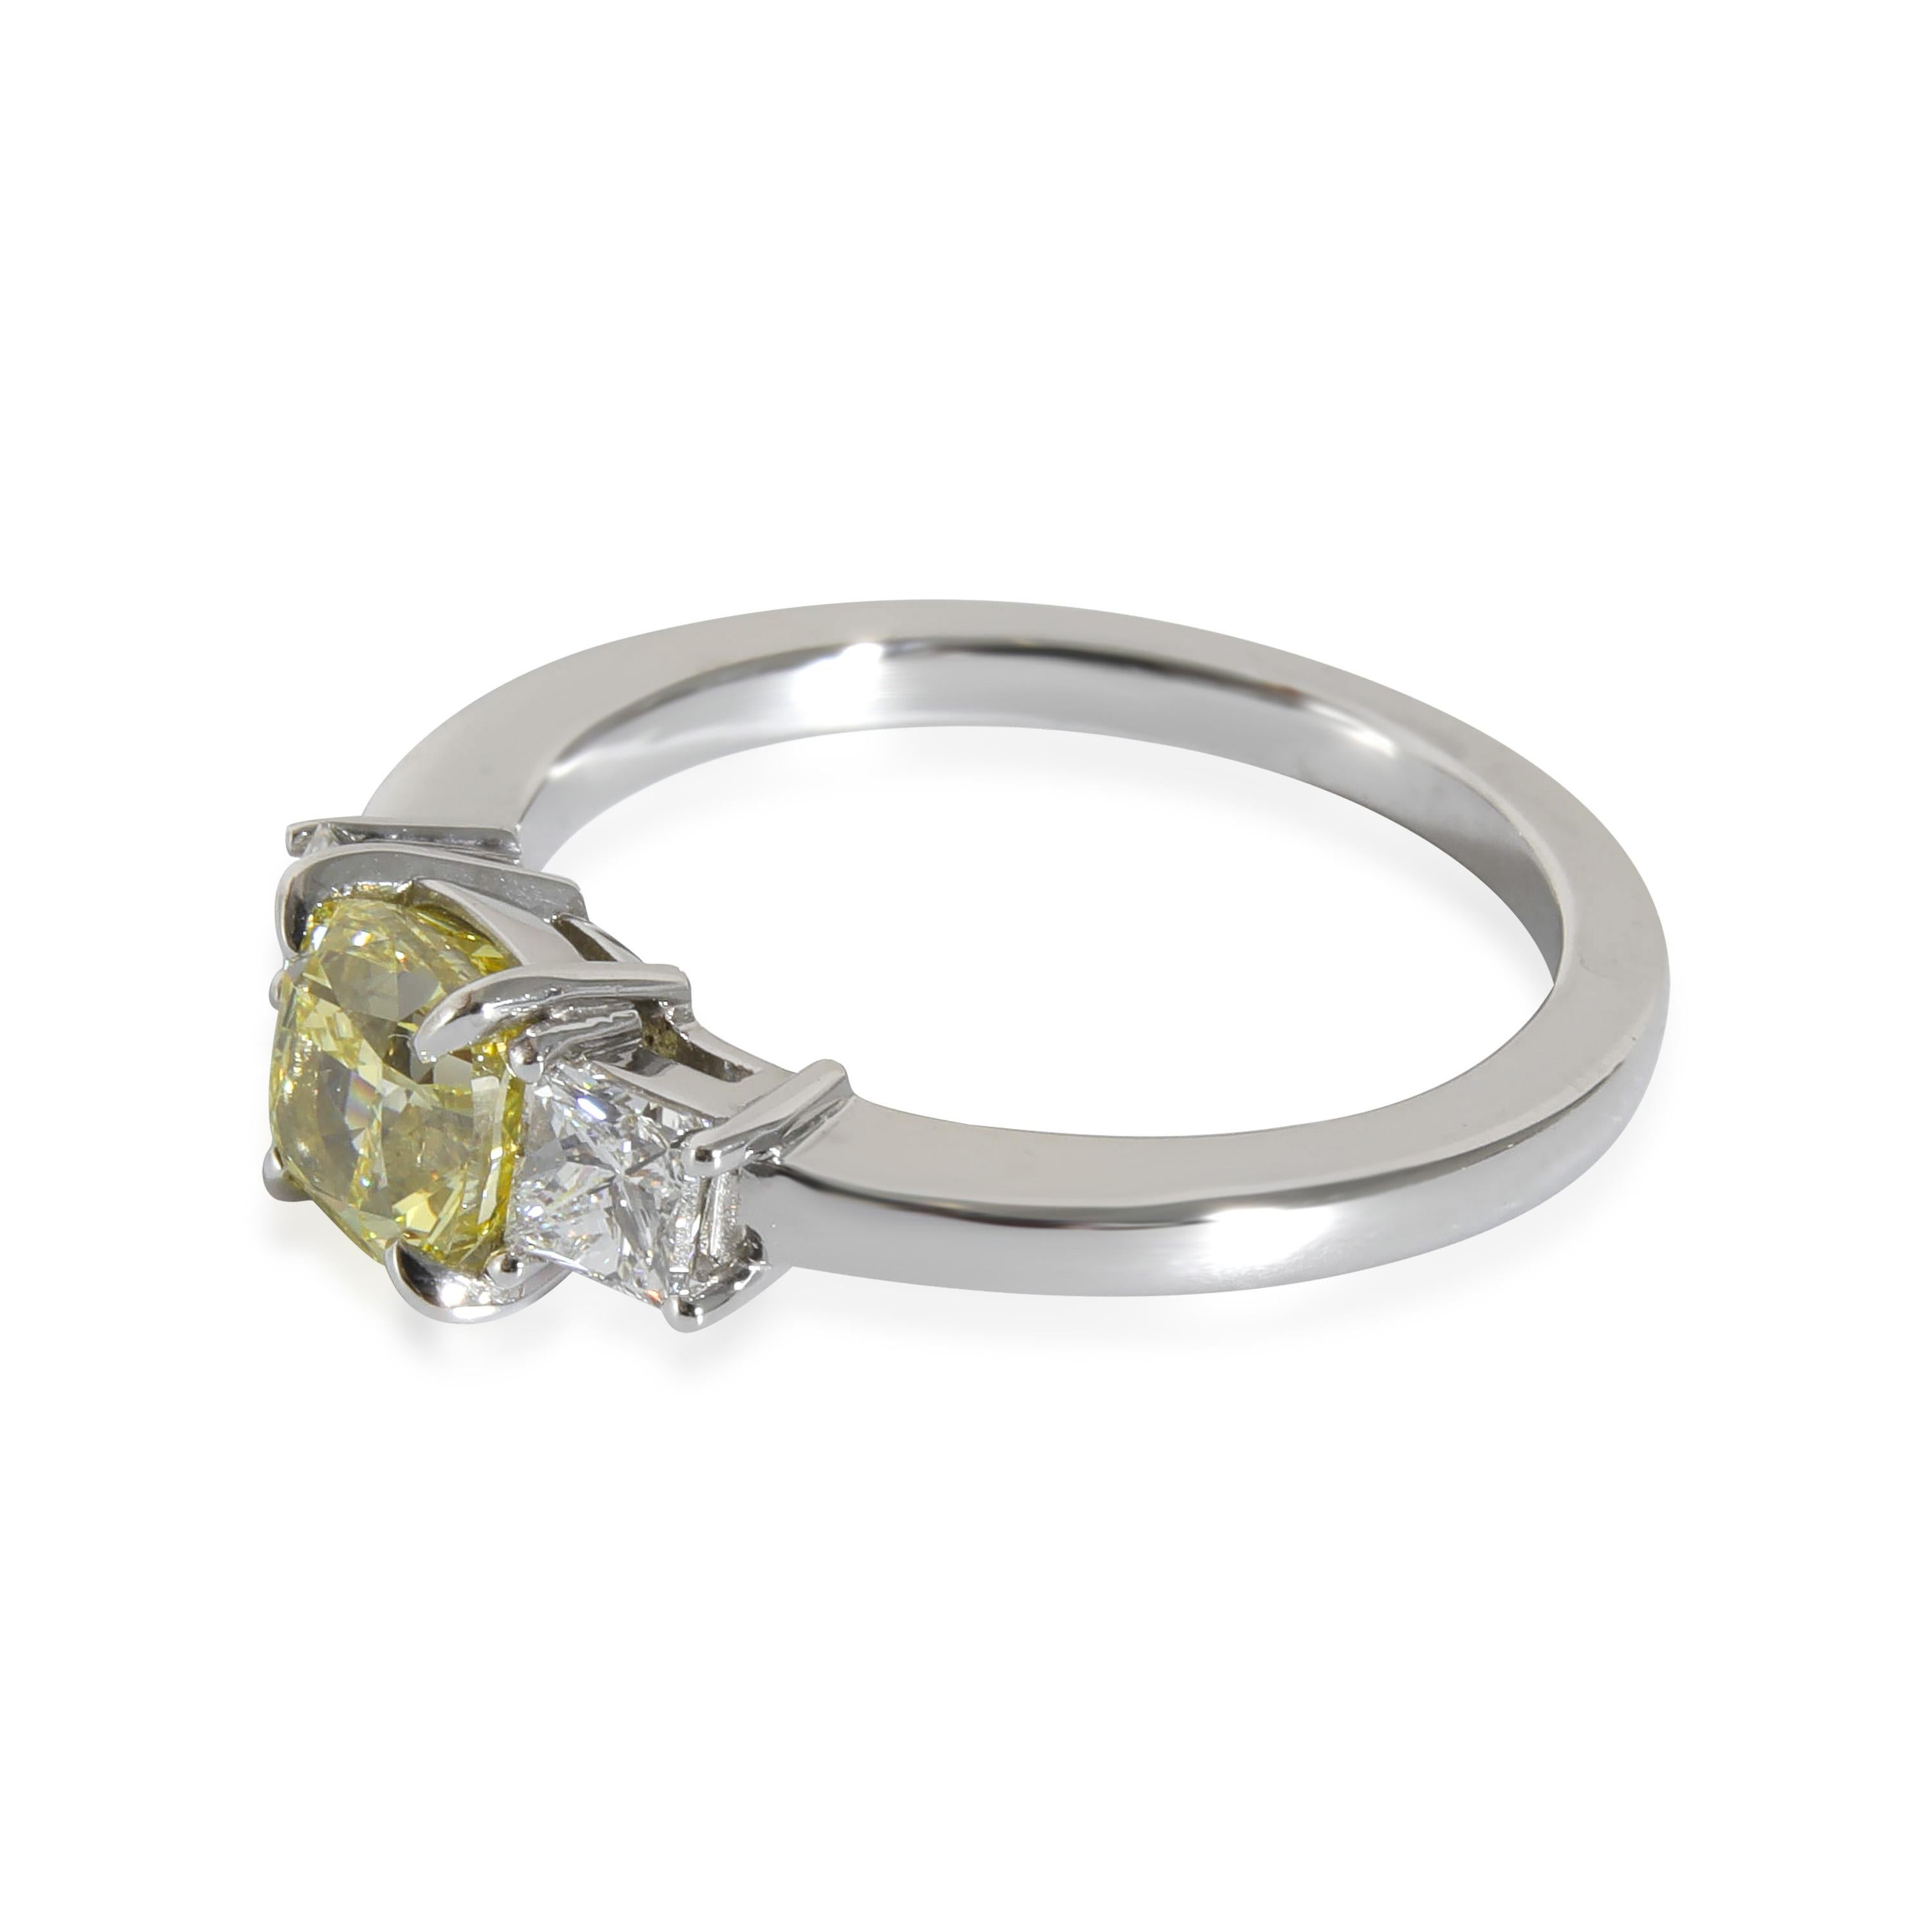 Fancy Intense Yellow Cushion Engagement Ring in Platinum VS1 1.31 CTW

PRIMARY DETAILS
SKU: 131906
Listing Title: Fancy Intense Yellow Cushion Engagement Ring in Platinum VS1 1.31 CTW
Condition Description: Retails for 13000 USD. In excellent